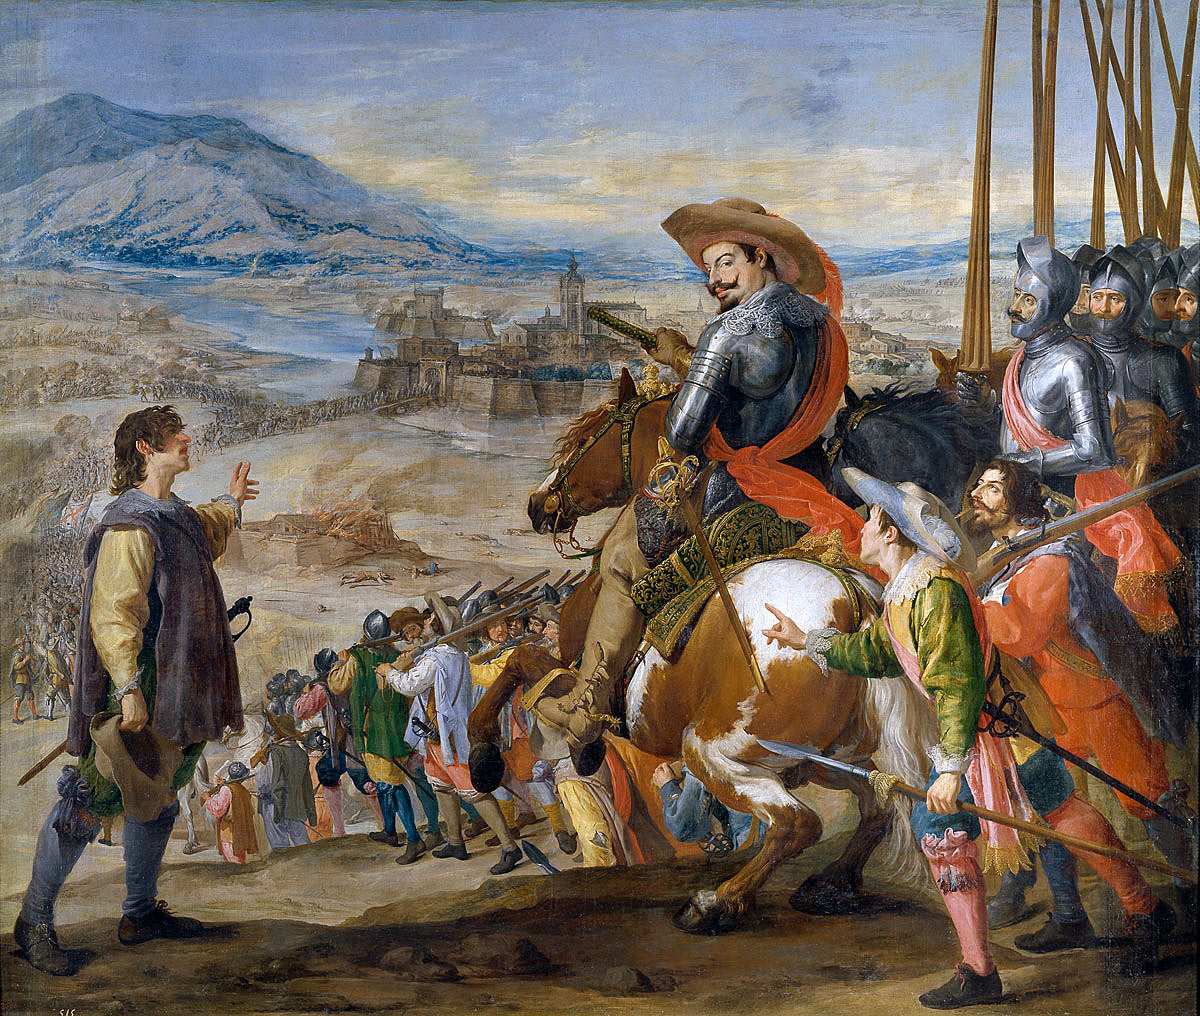 Troops approaching a city at the time of the English Civil War: Storming of Bristol on 26th July 1643 during the English Civil War